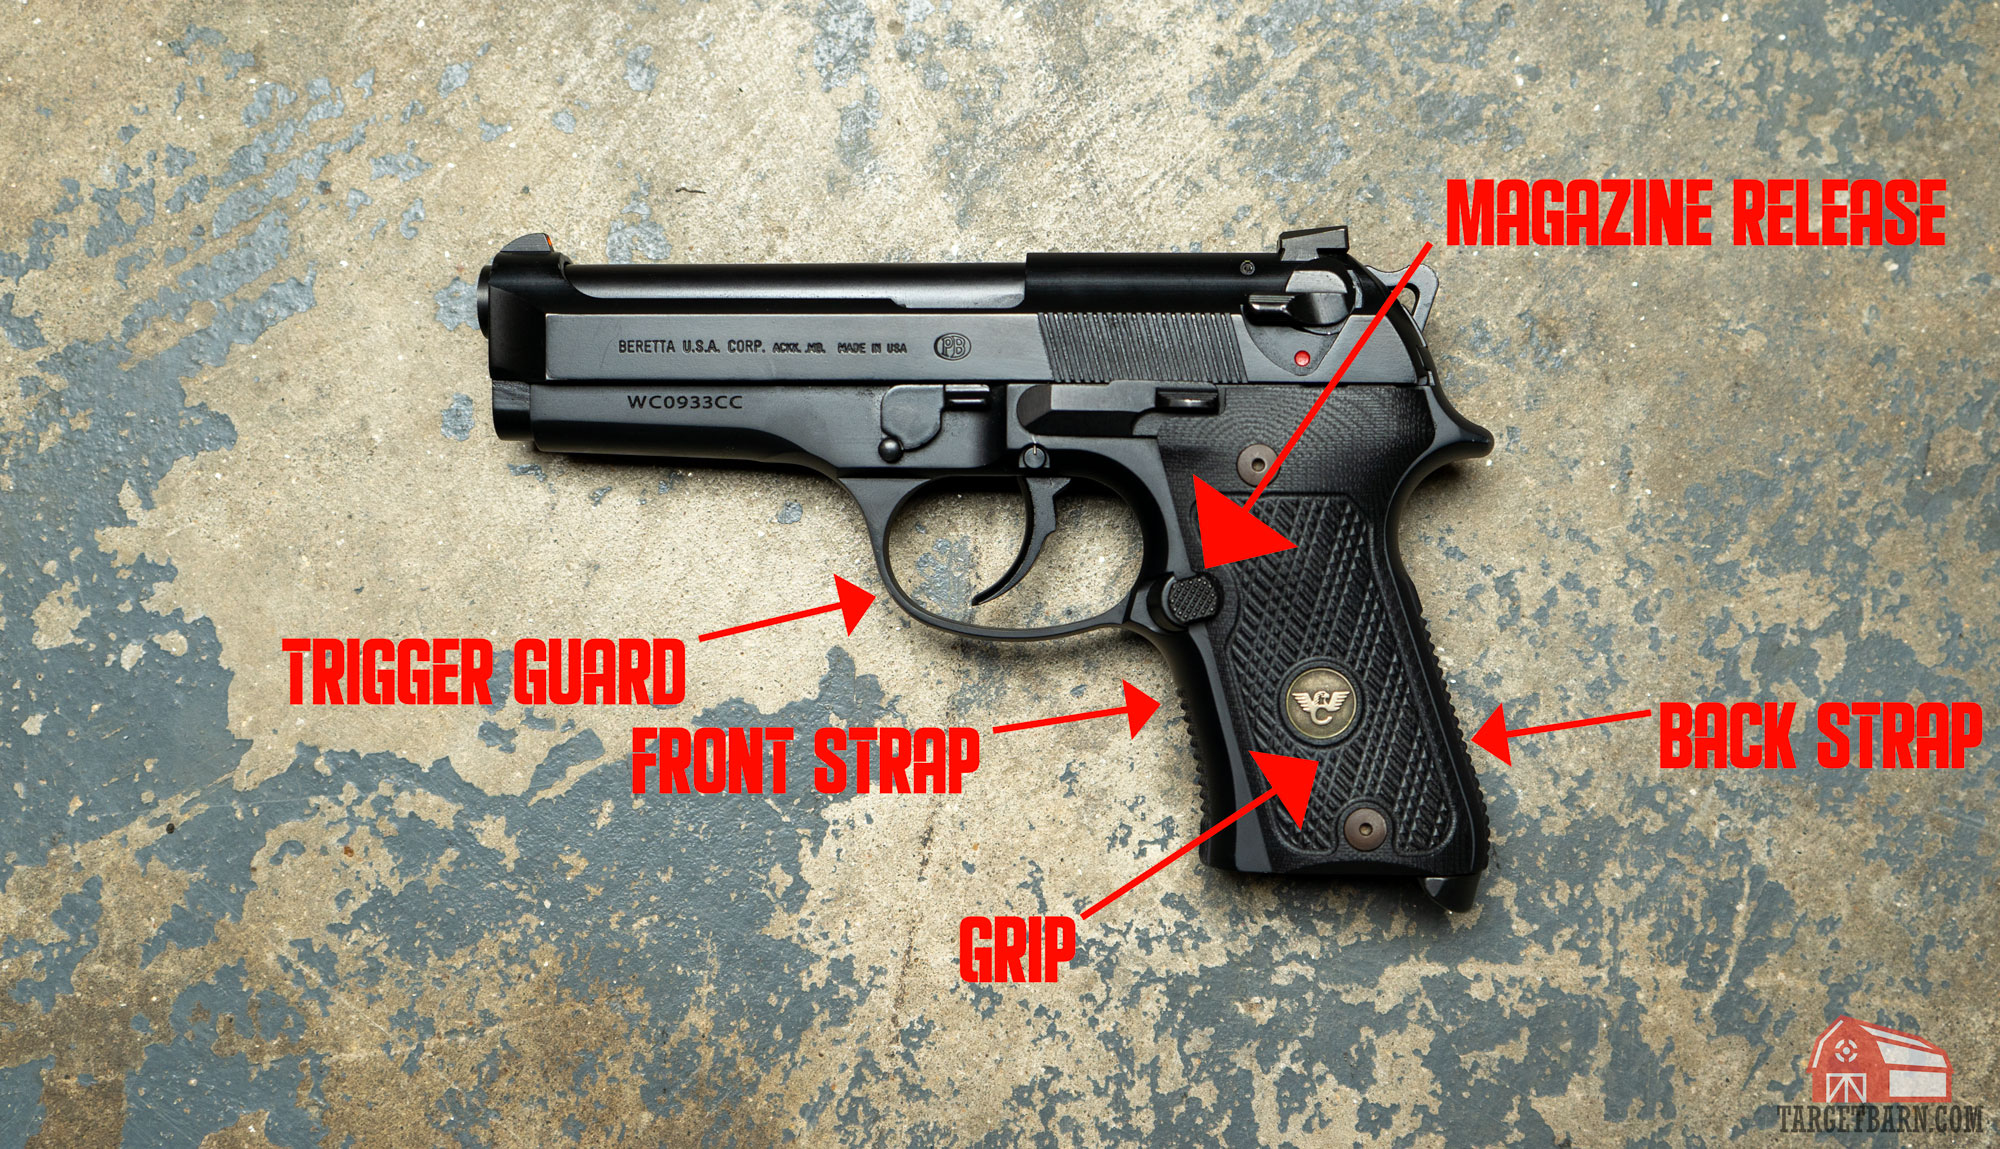 a diagram showing the parts of the pistol frame including trigger guard, front strap, back strap grip, and magazine release